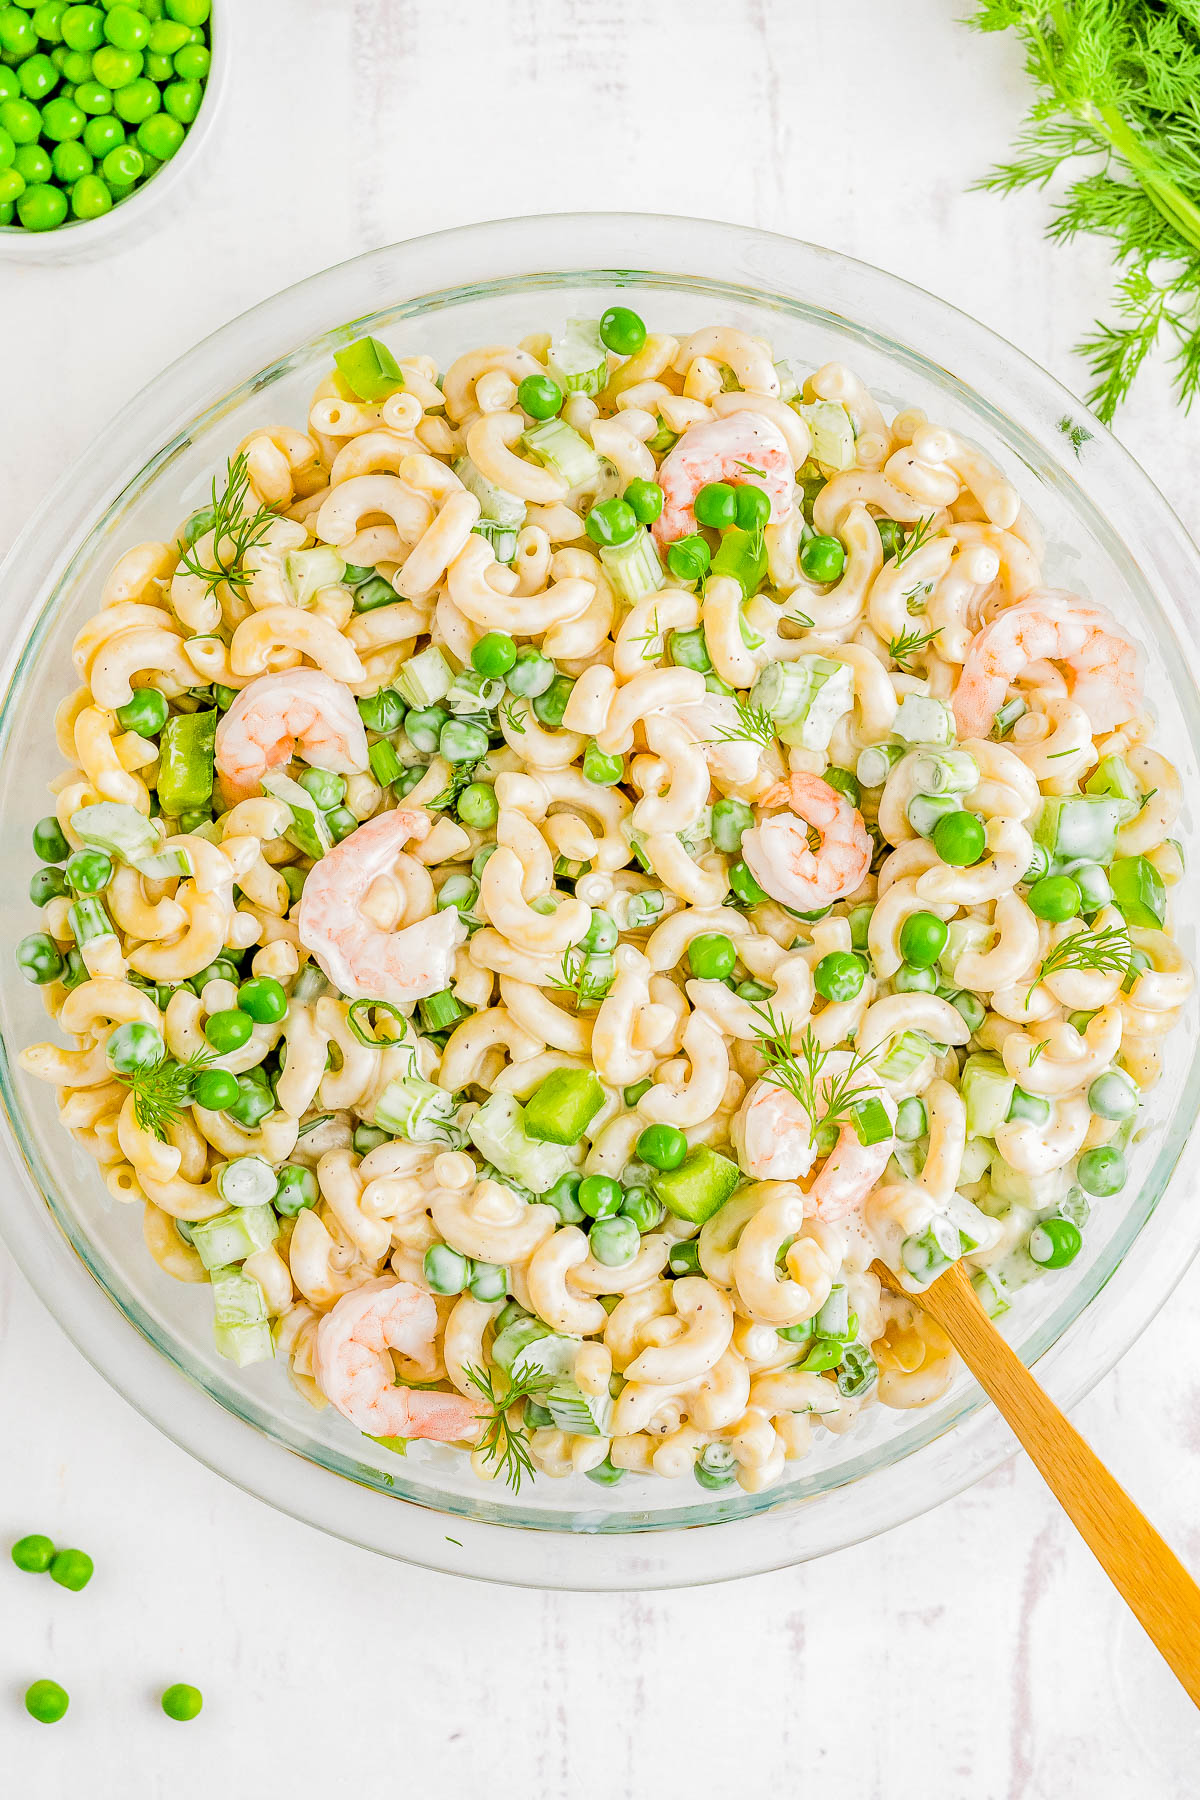 A bowl of shrimp pasta salad with peas, celery, and fresh dill, served on a white background with a wooden spoon.